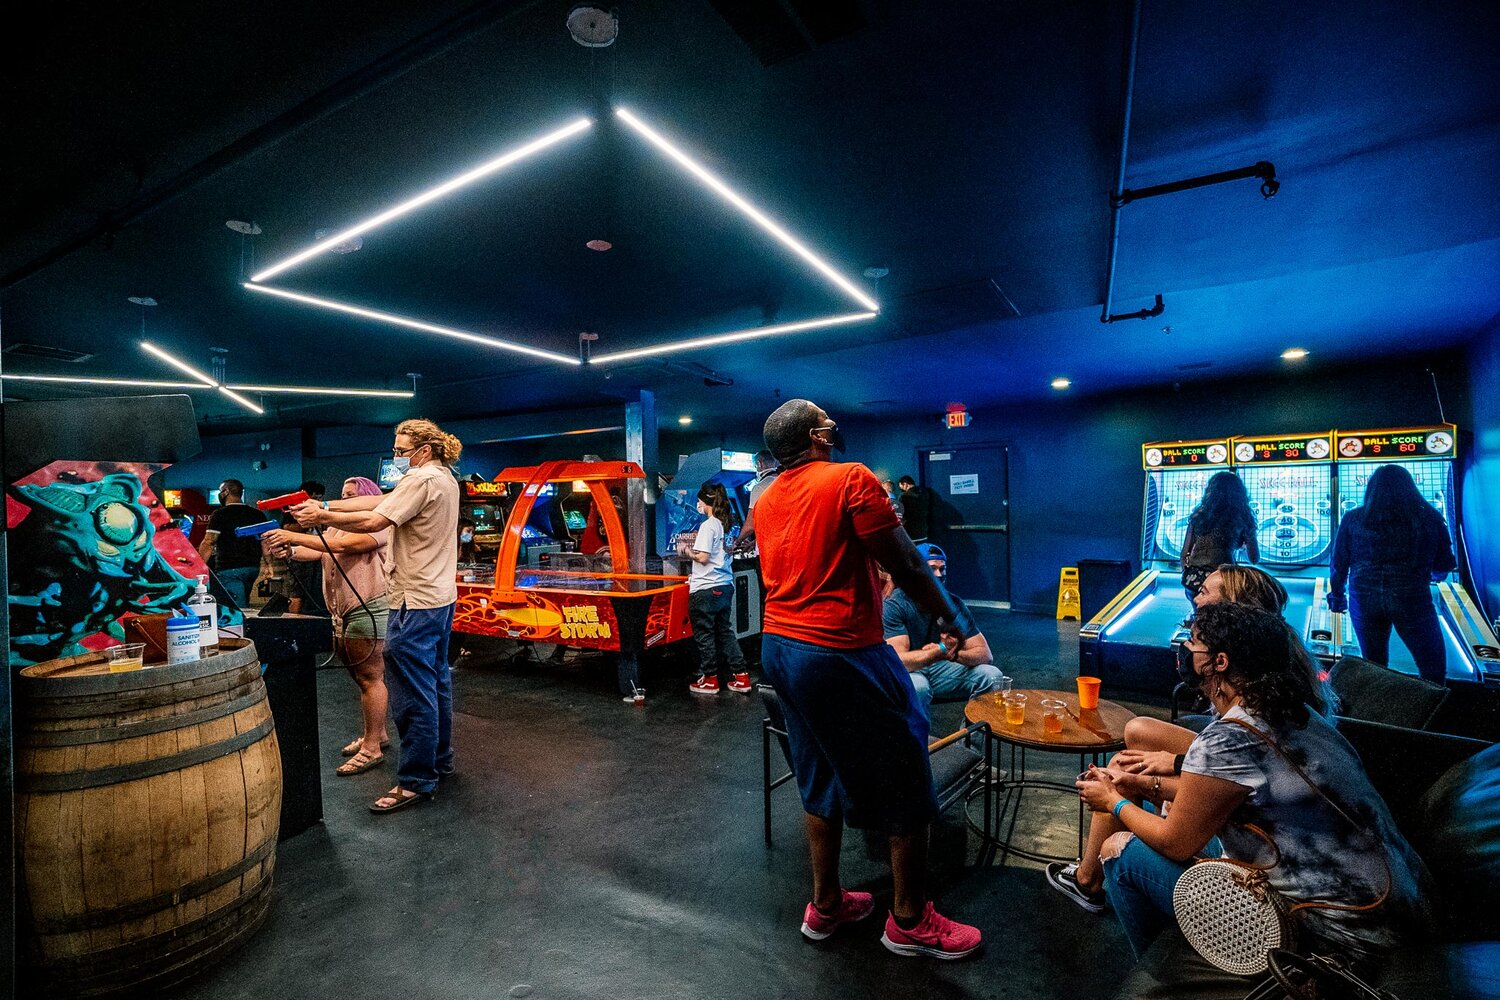 Cidercade is an Exhilarating Adult Cider & Arcade Bar with Waterfront